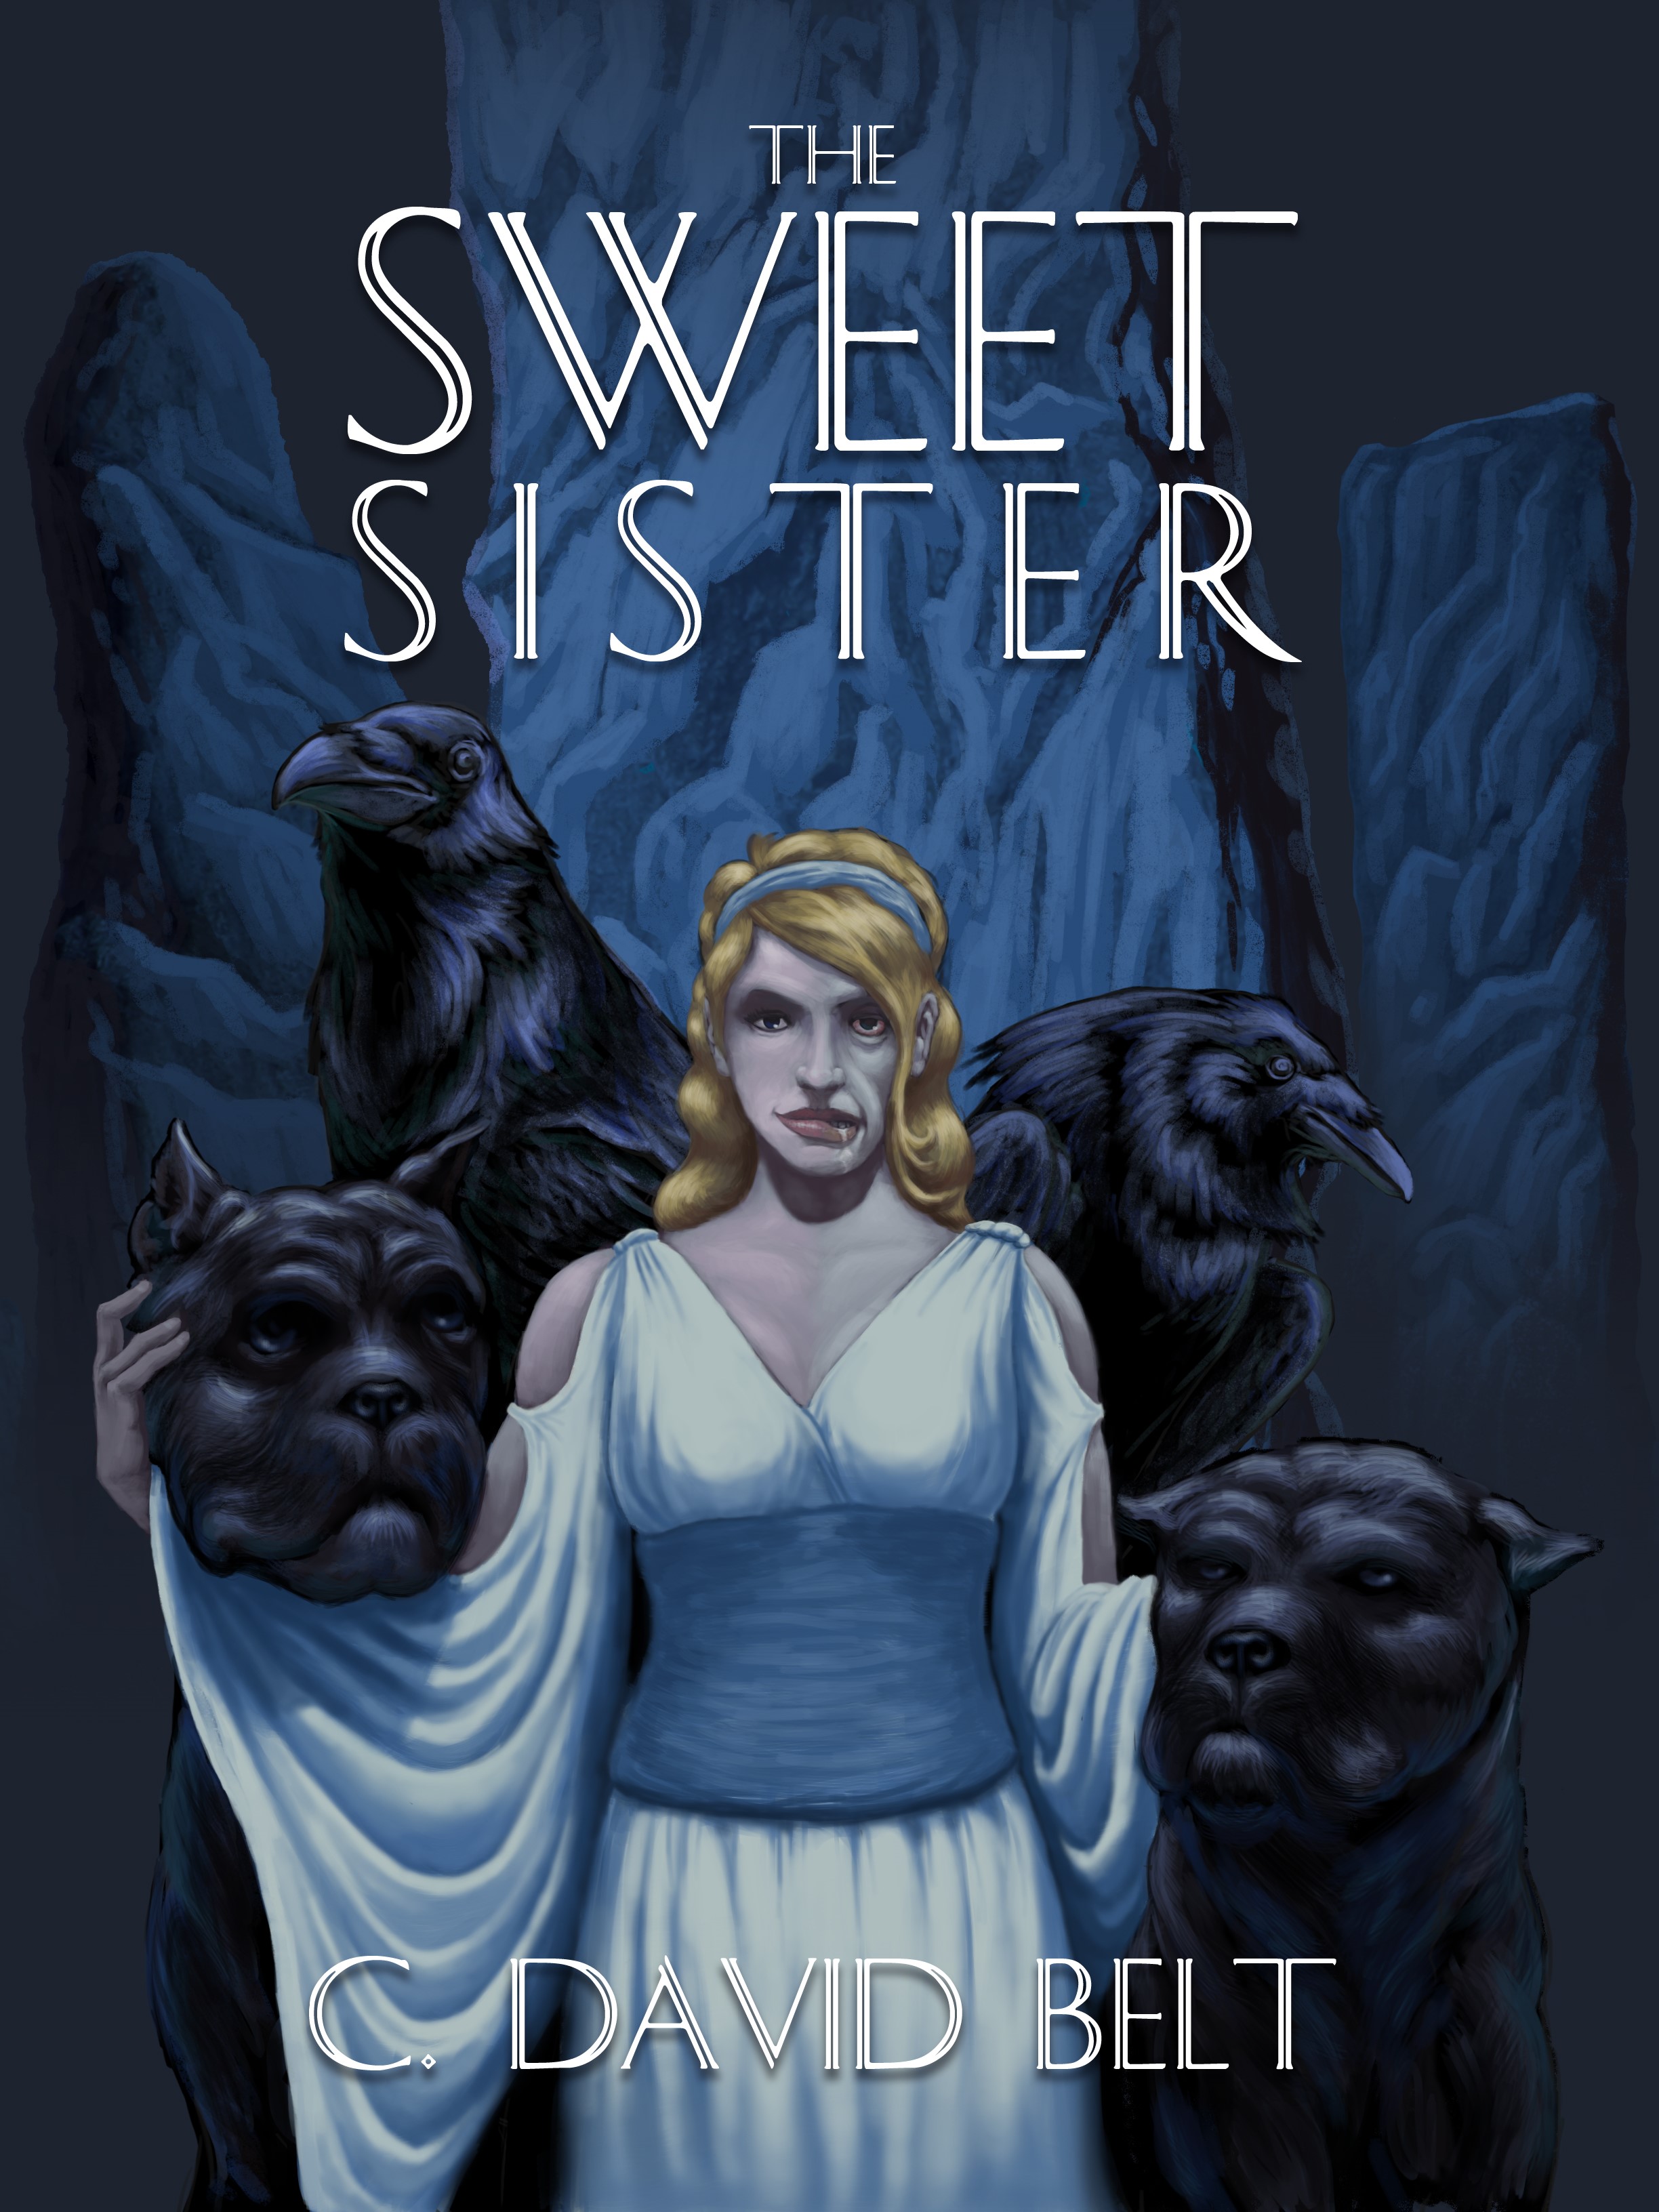 About The Sweet Sister